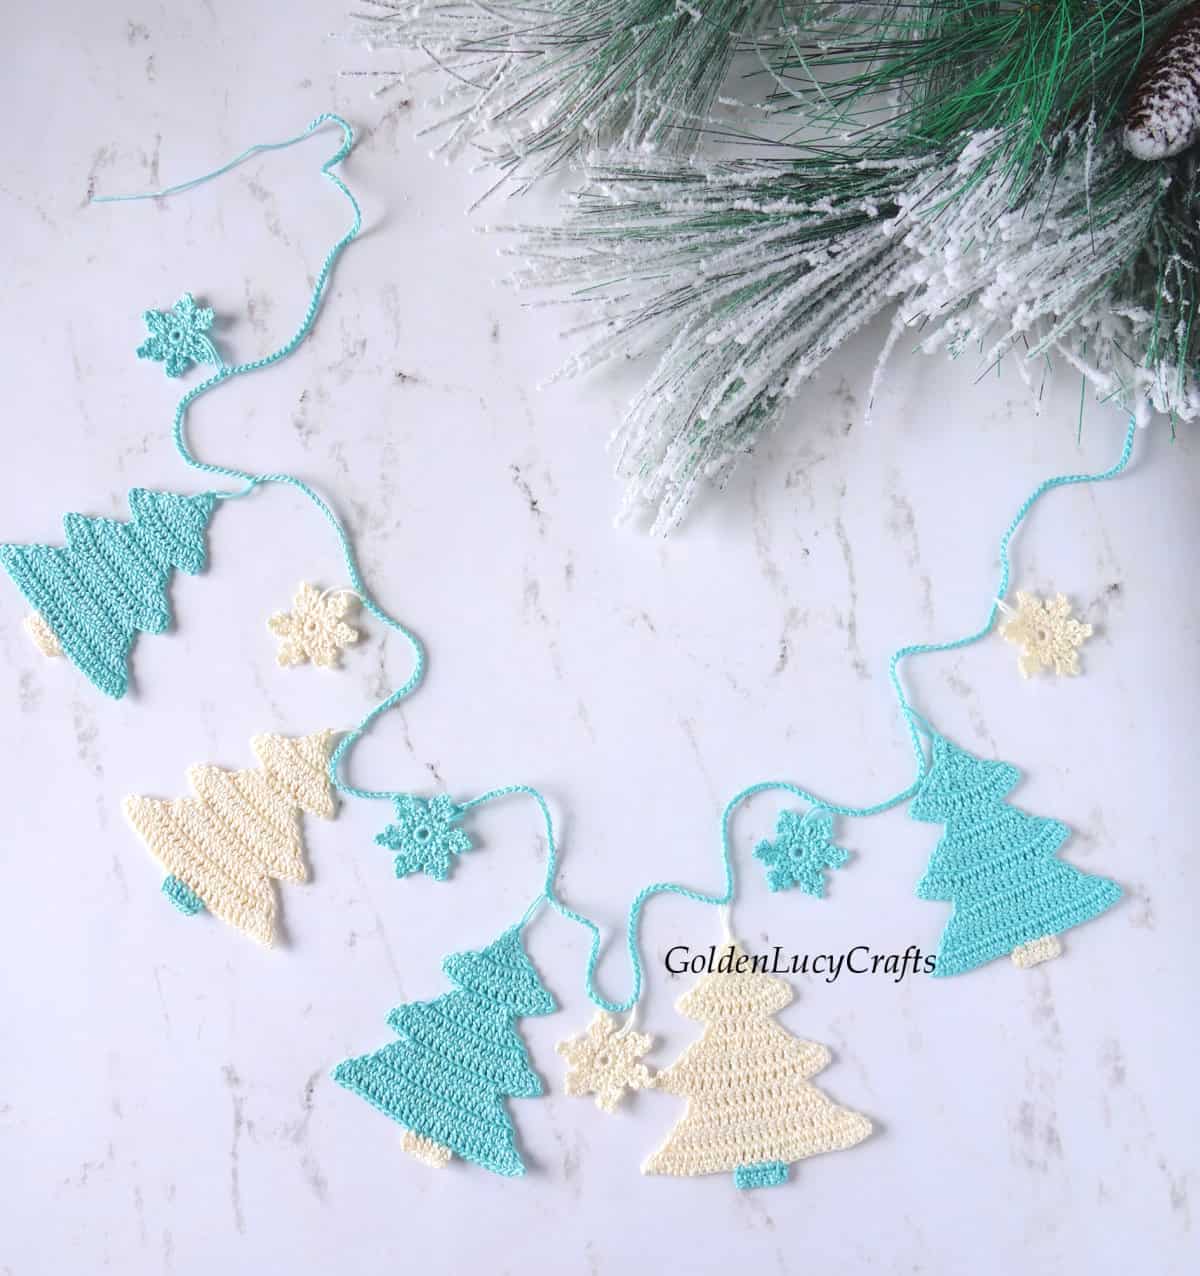 Crochet Christmas tree garland in turquoise and cream color laying flat on the table